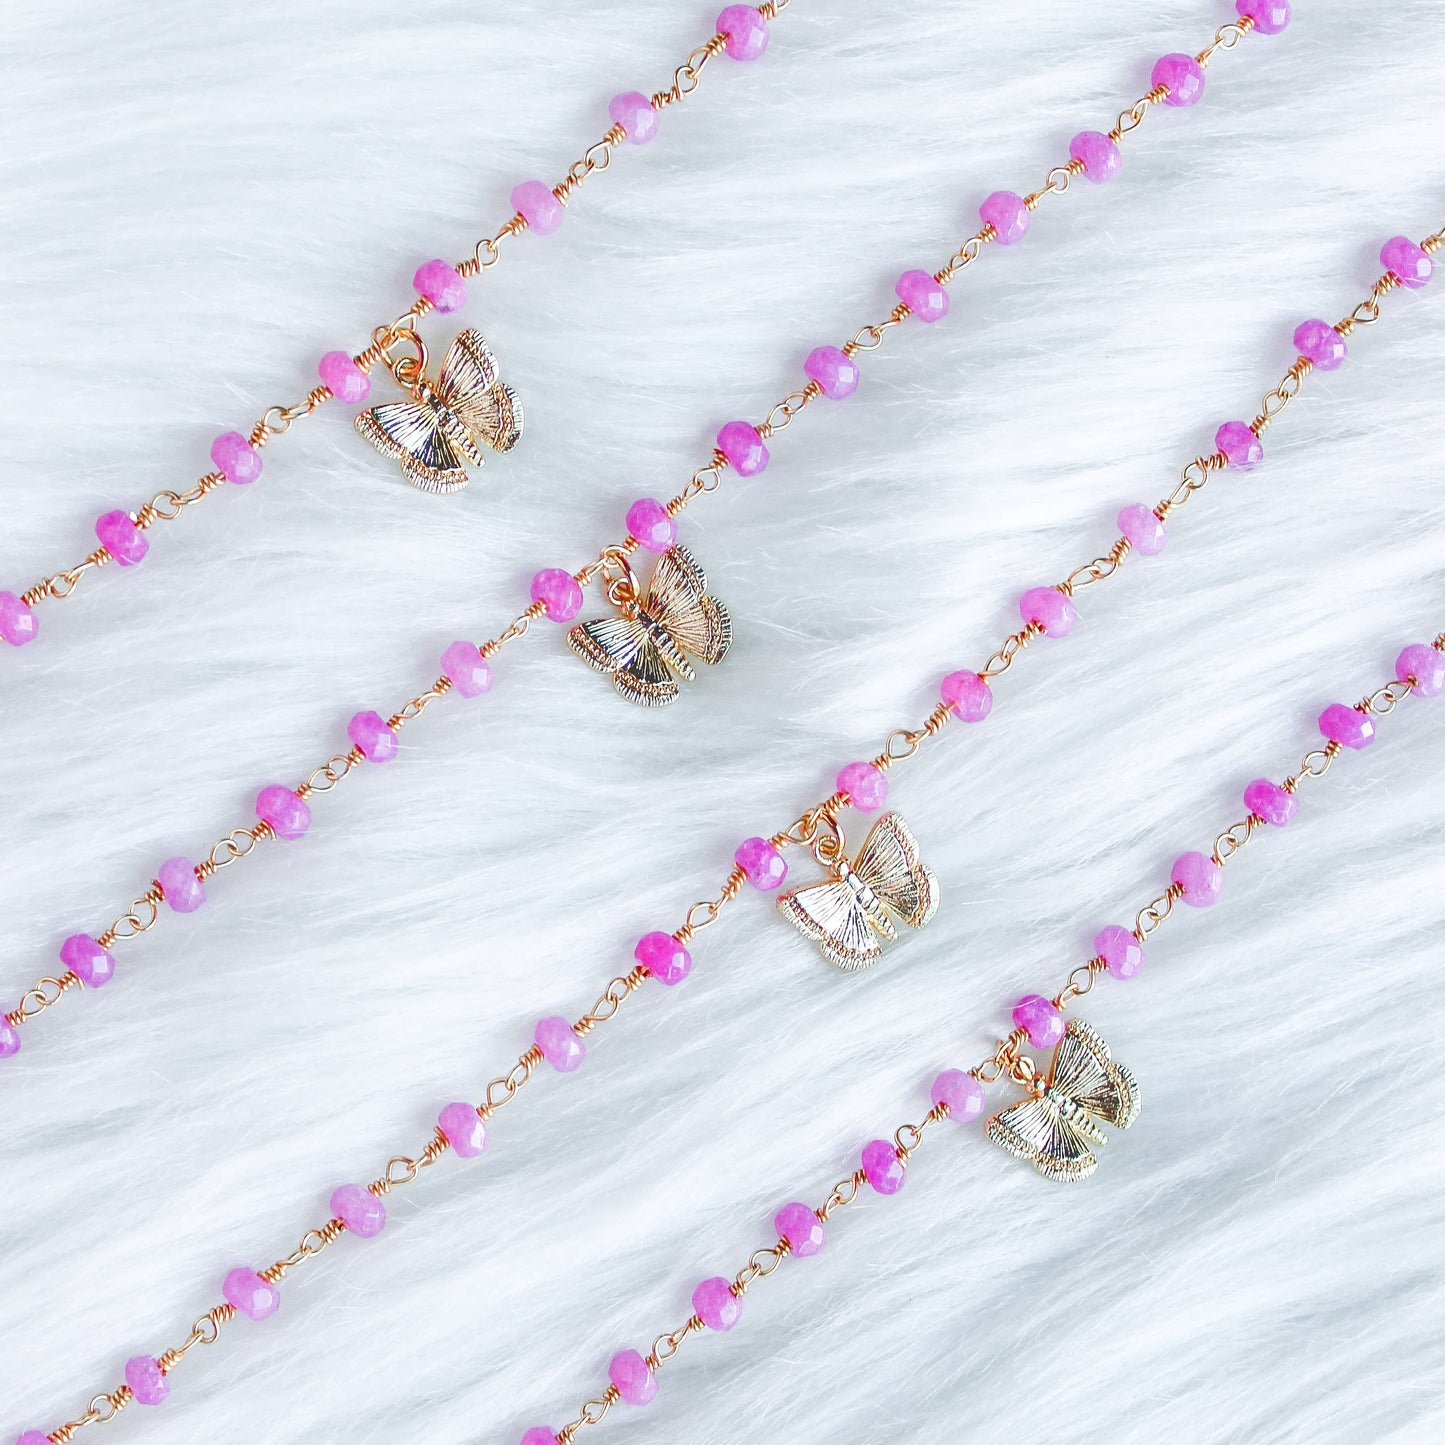 One & Only- Hot Pink Beaded Rosary Chain Butterfly Necklace